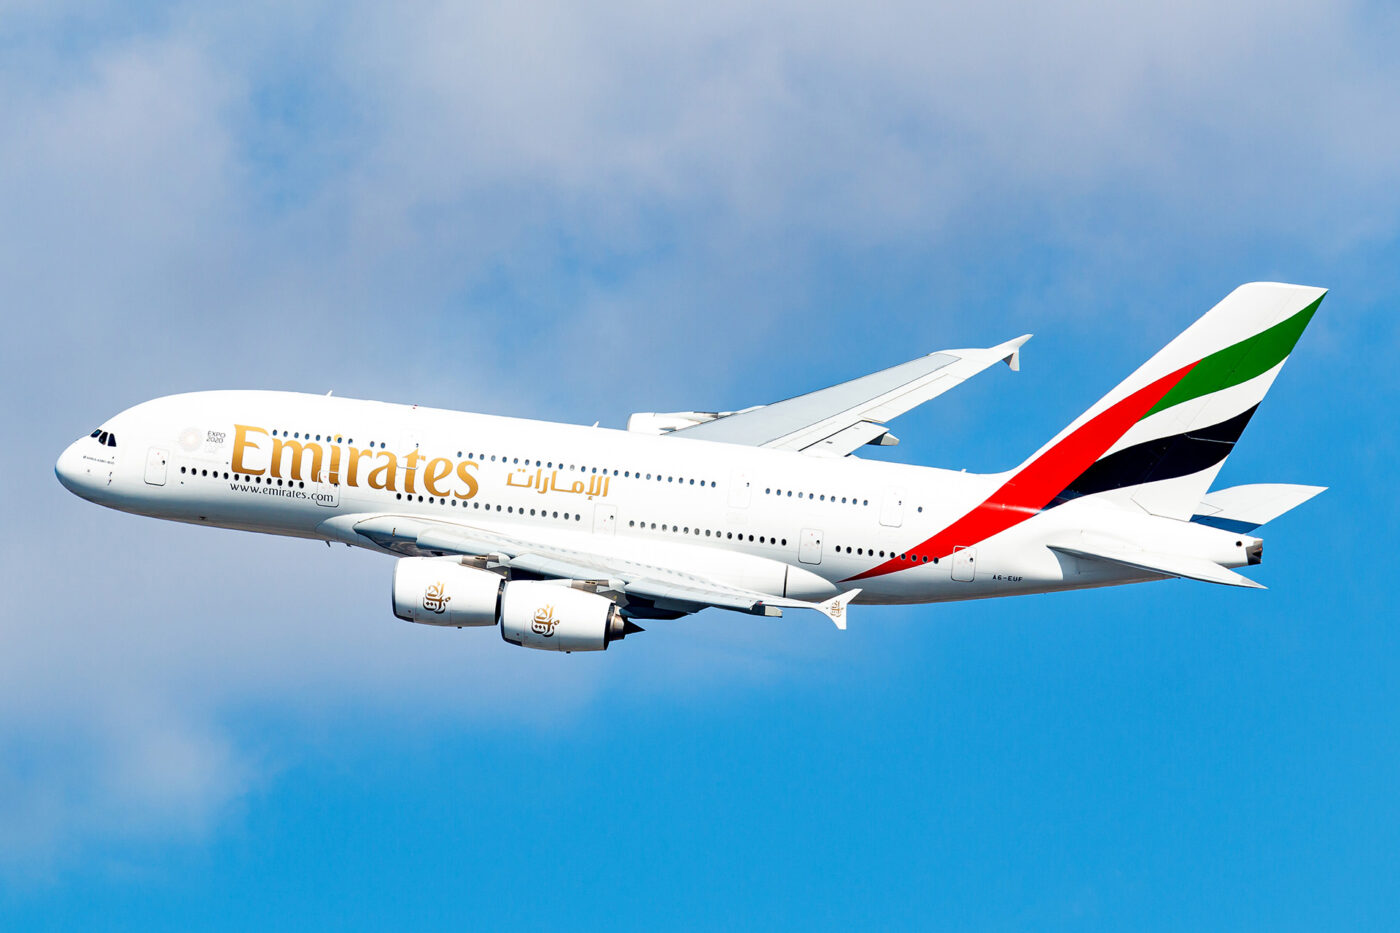 Emirates A380 flying in sky